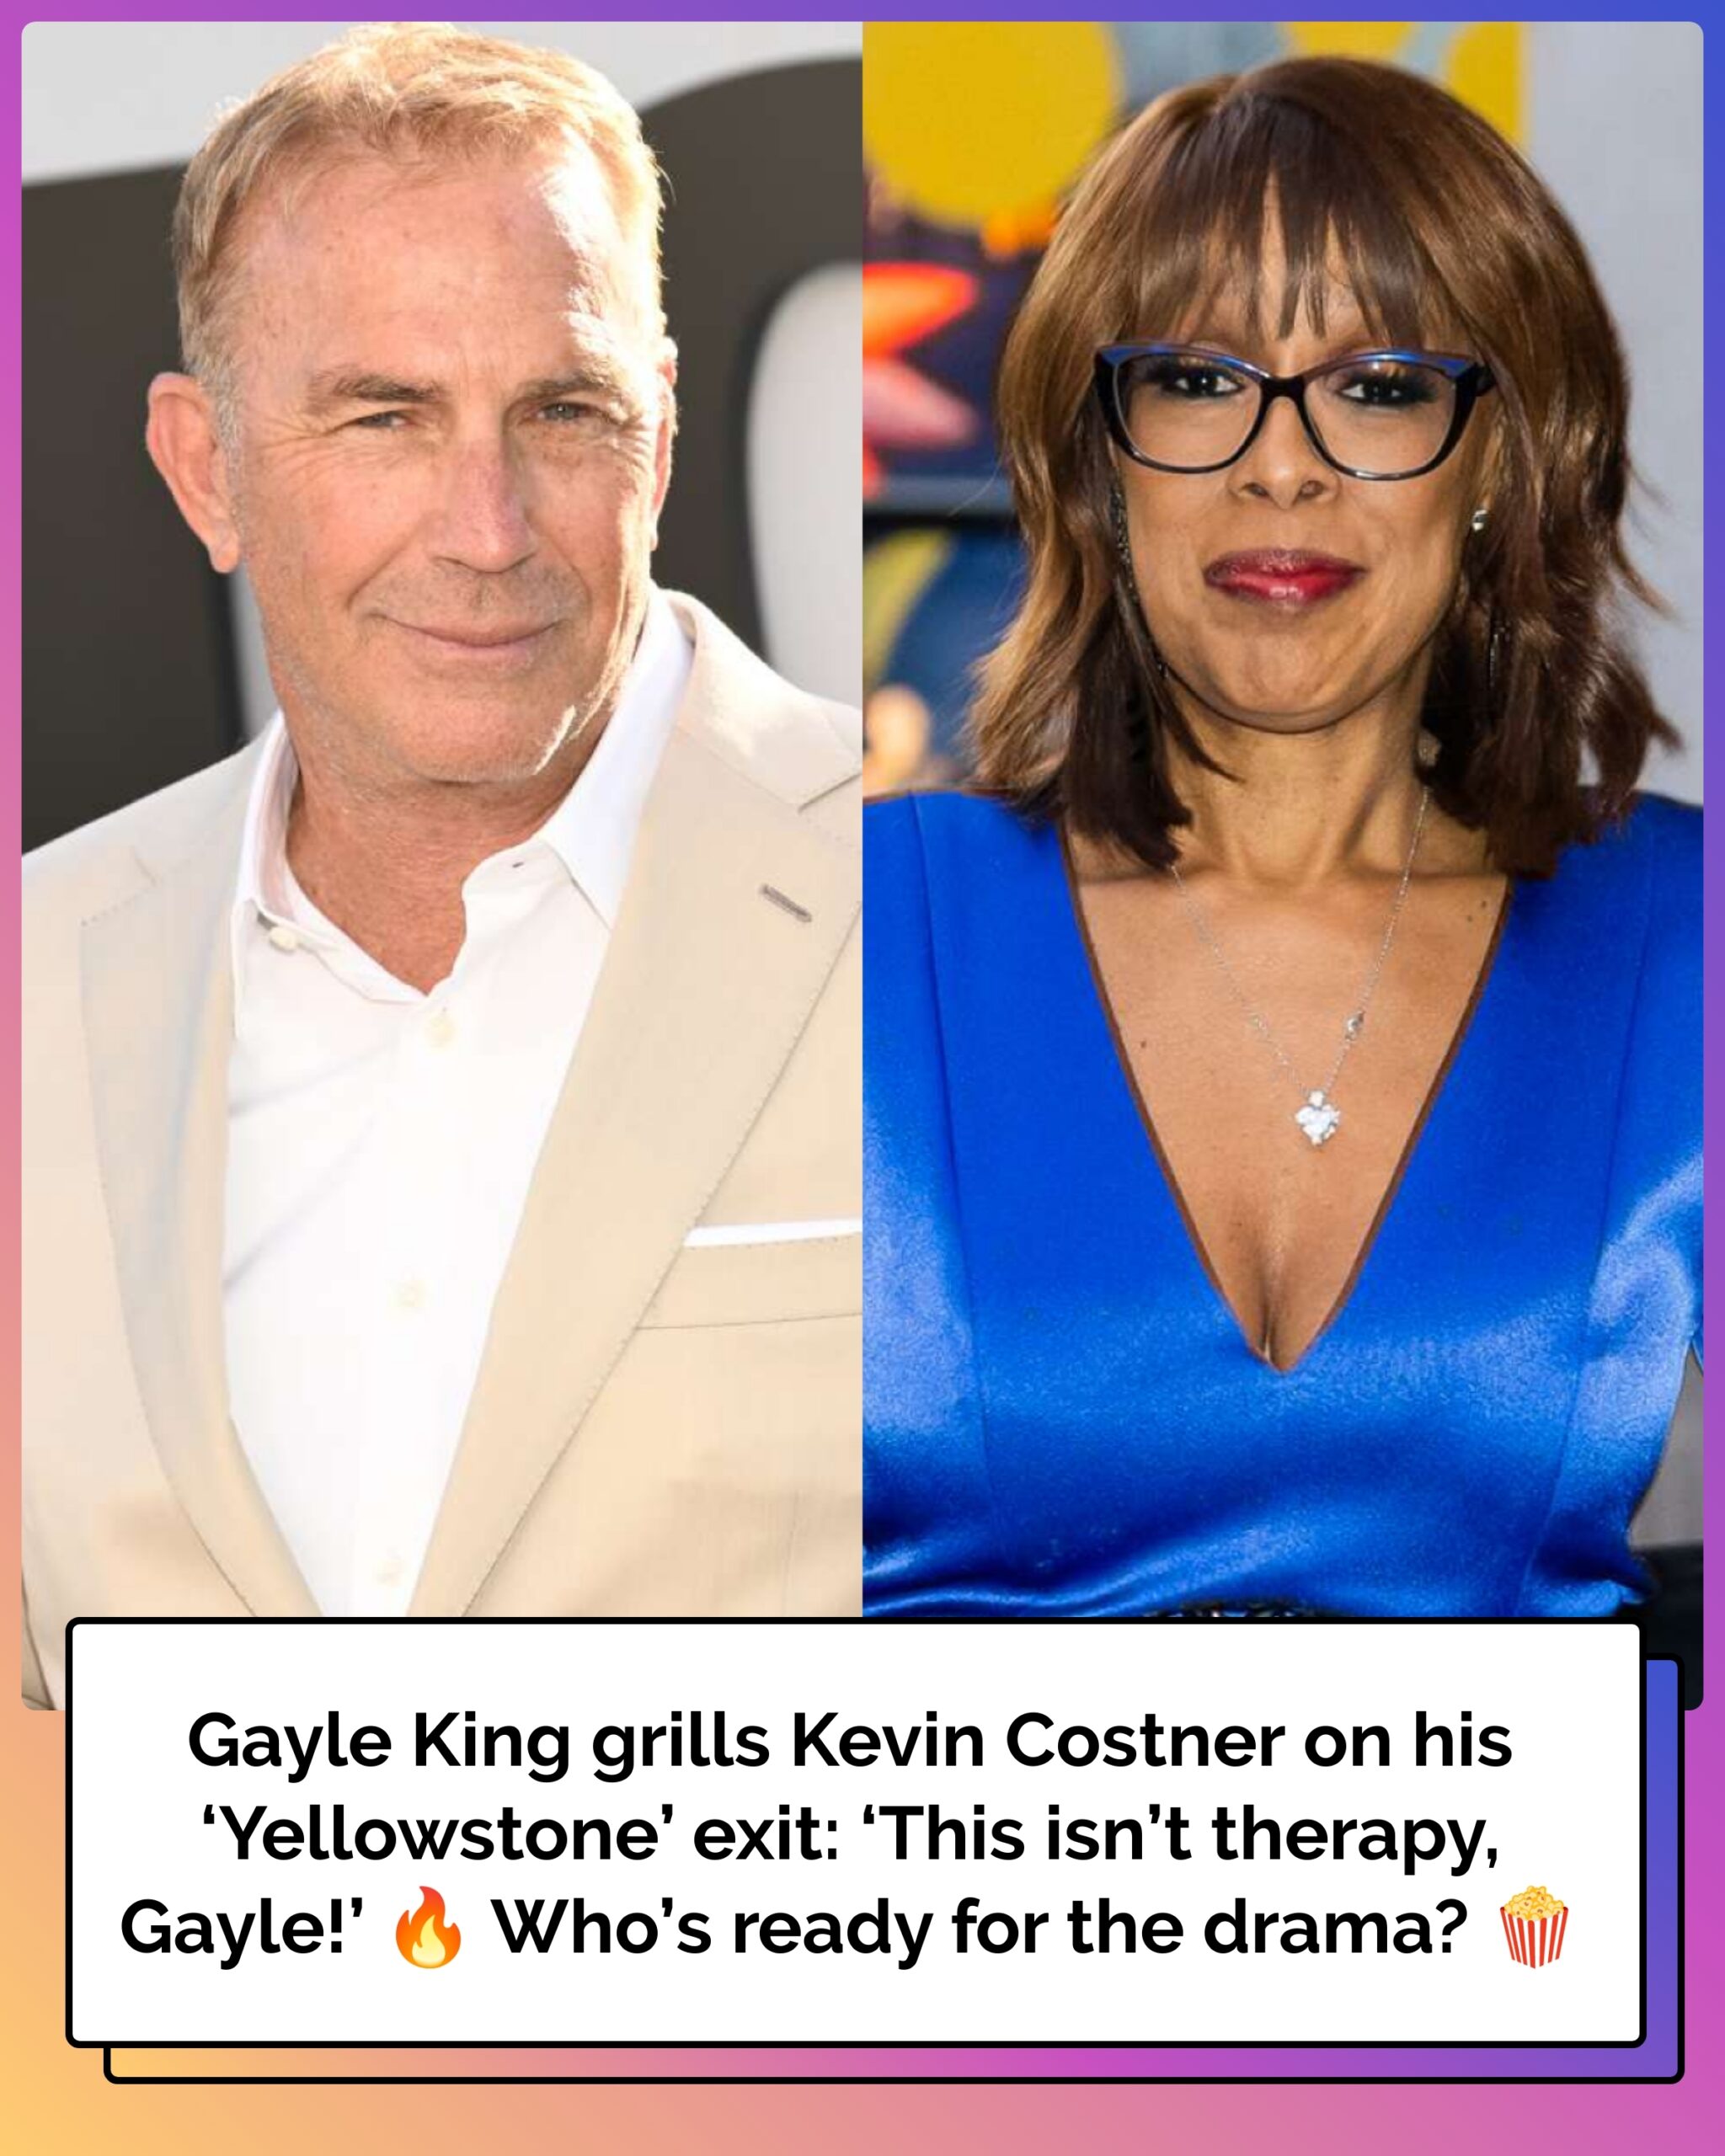 Gayle King Challenges Kevin Costner’s Reasons for Leaving ‘Yellowstone’: ‘This Isn’t Therapy, Gayle’